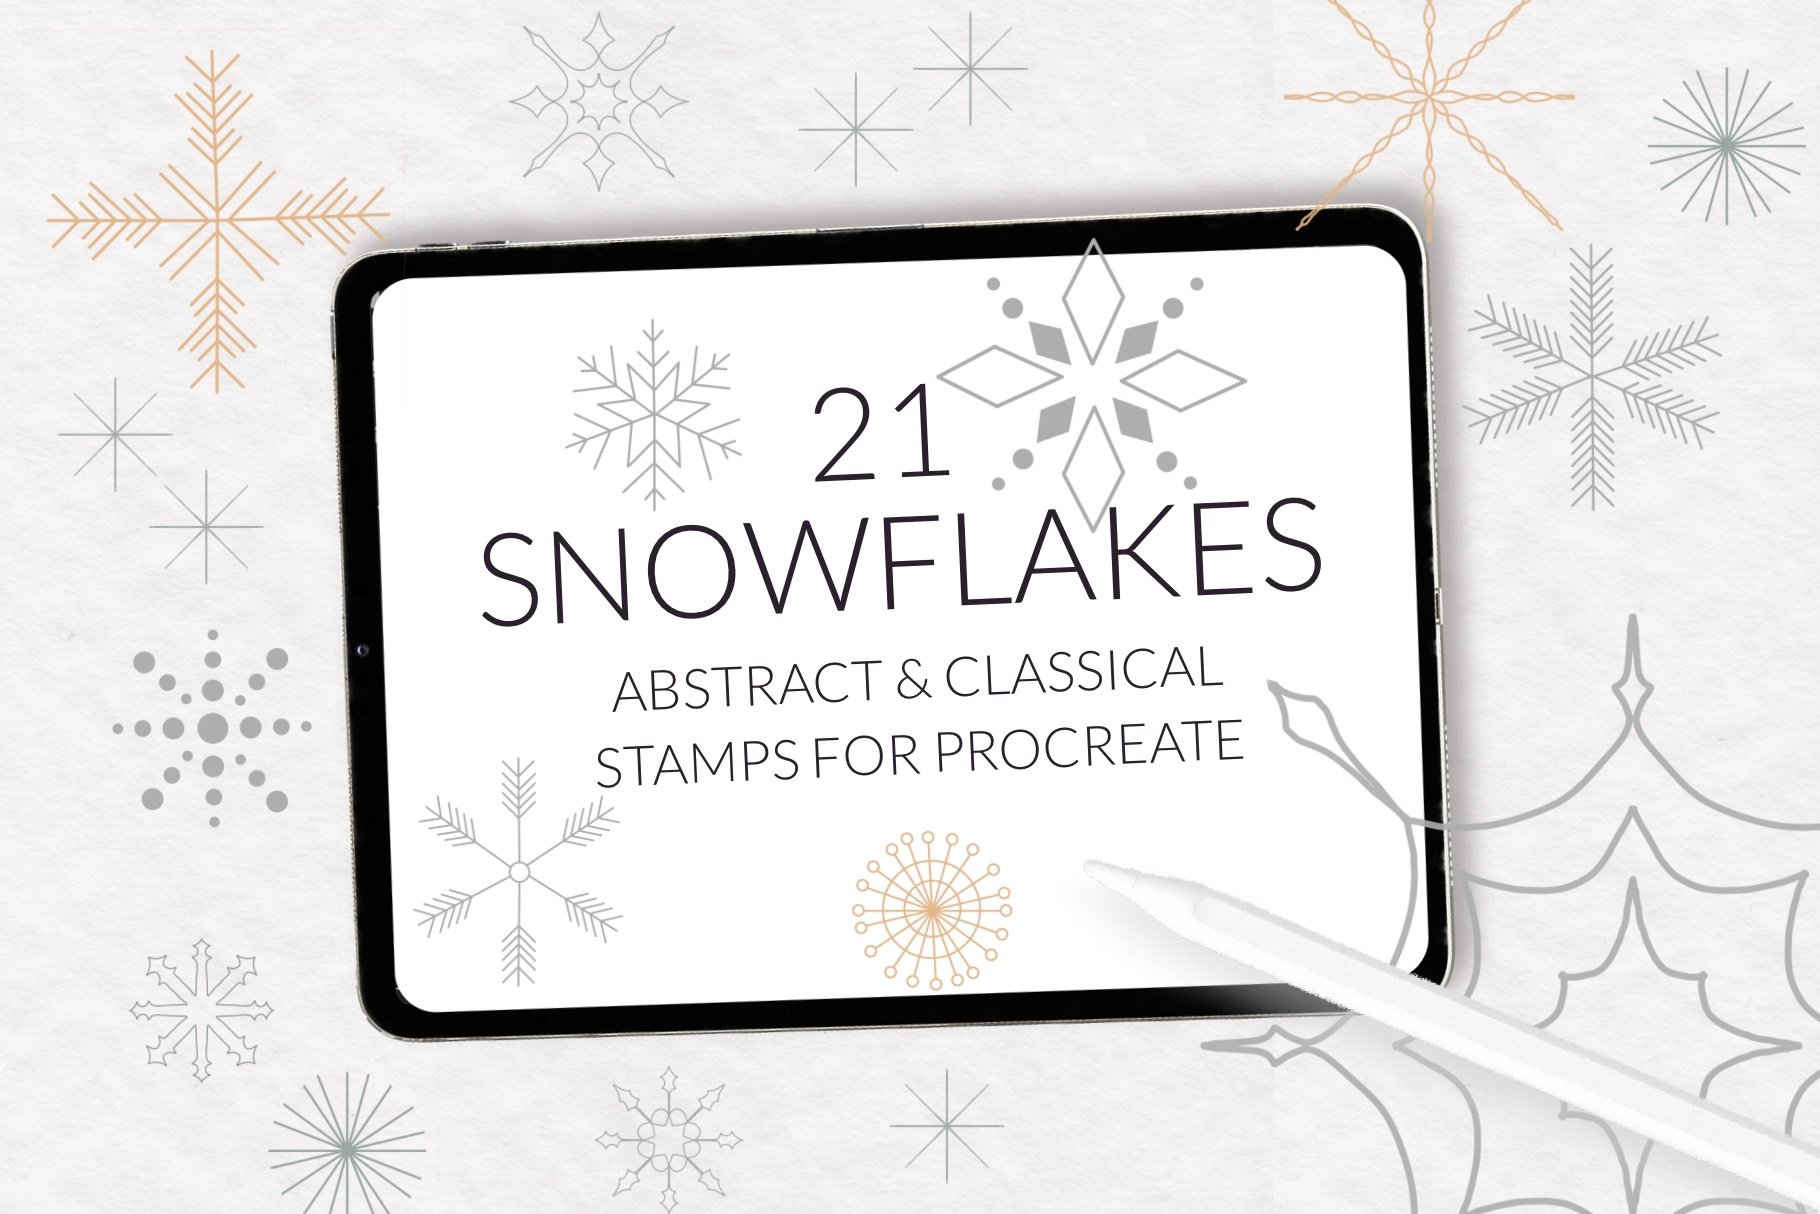 Procreate Snowflake Stamps, Snowflake Stamps, Procreate Stamp, iPad,  Snowflakes